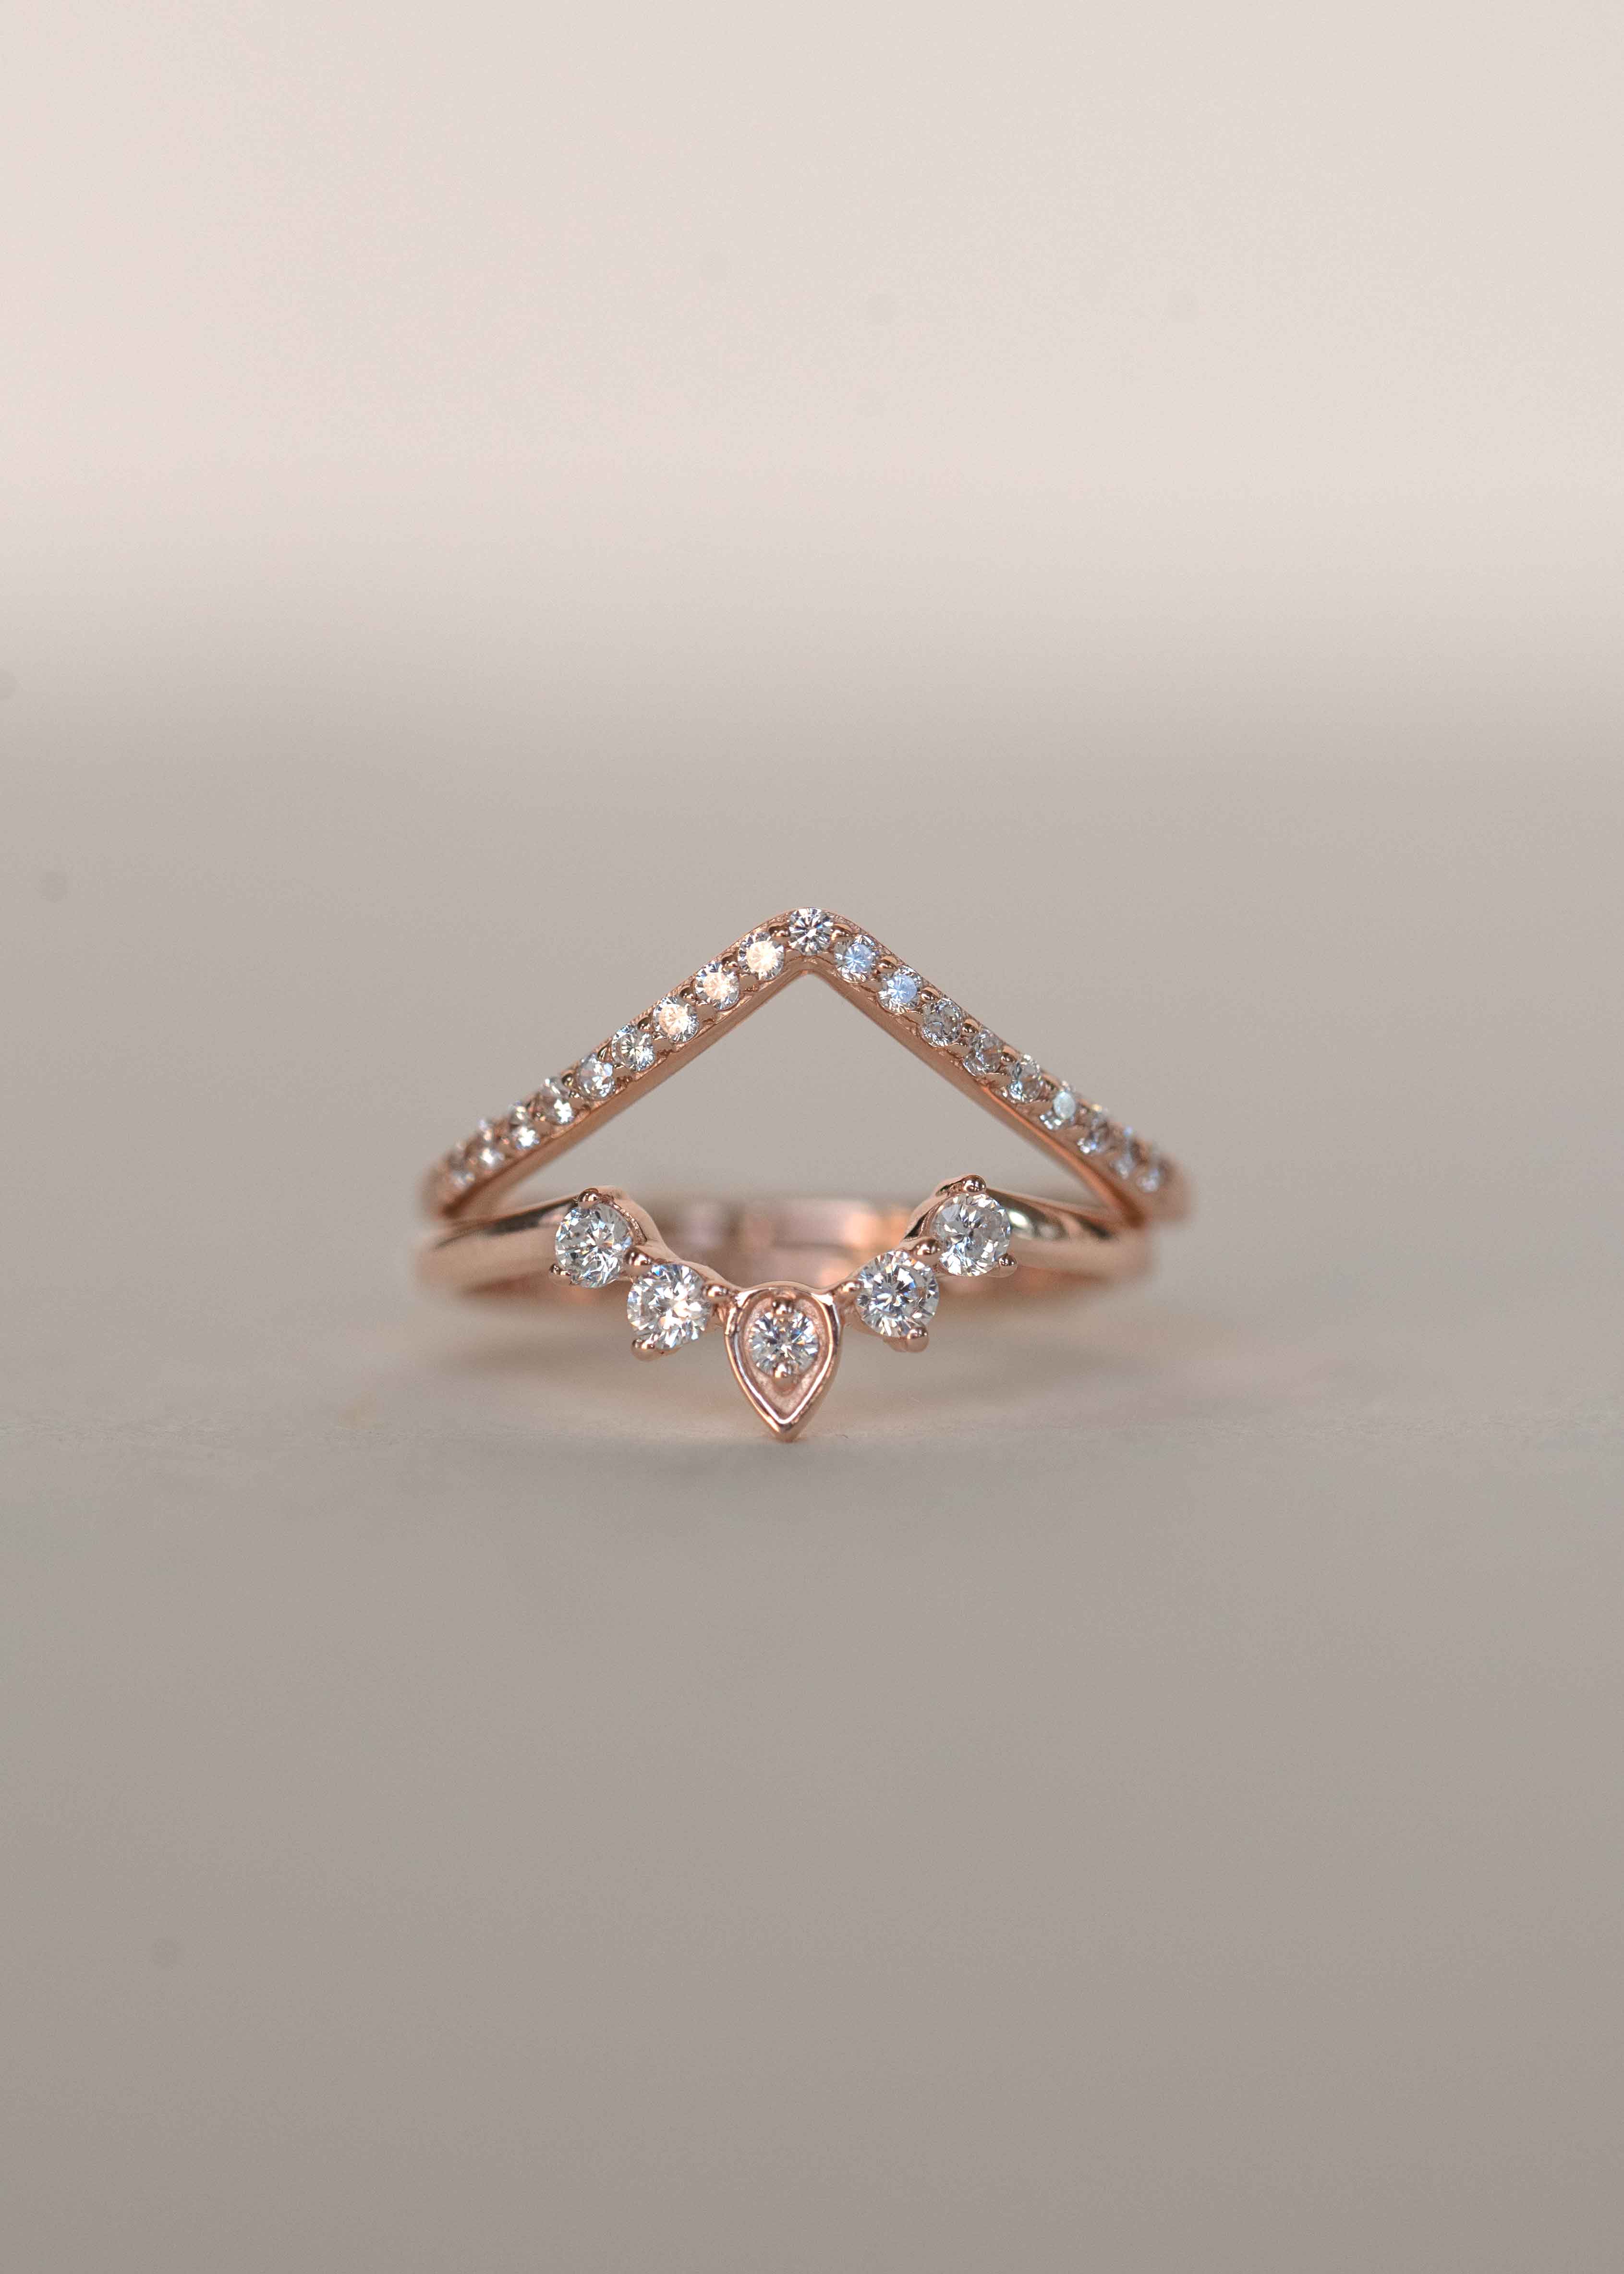 Stacking Ring Set for Women Best Gifts Engagement Wedding Rings Gold Rose Gold